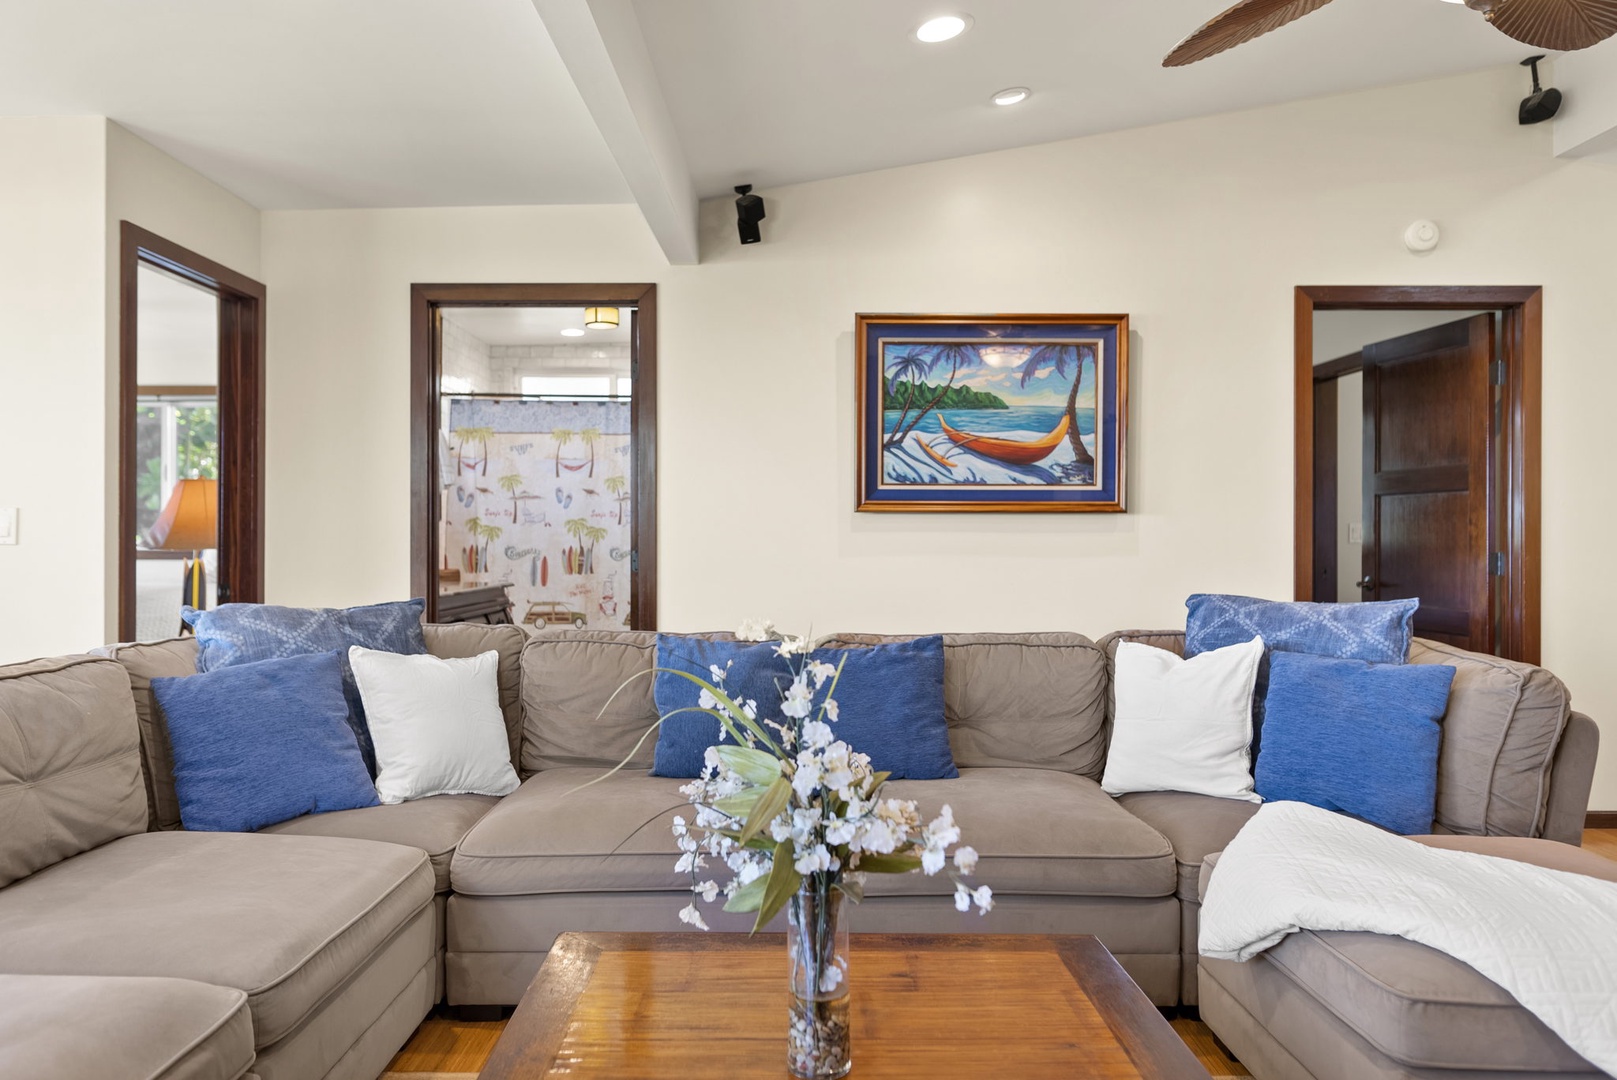 Waialua Vacation Rentals, Hale Oka Nunu - Comfortable and oversized sectional couch for the whole group to enjoy